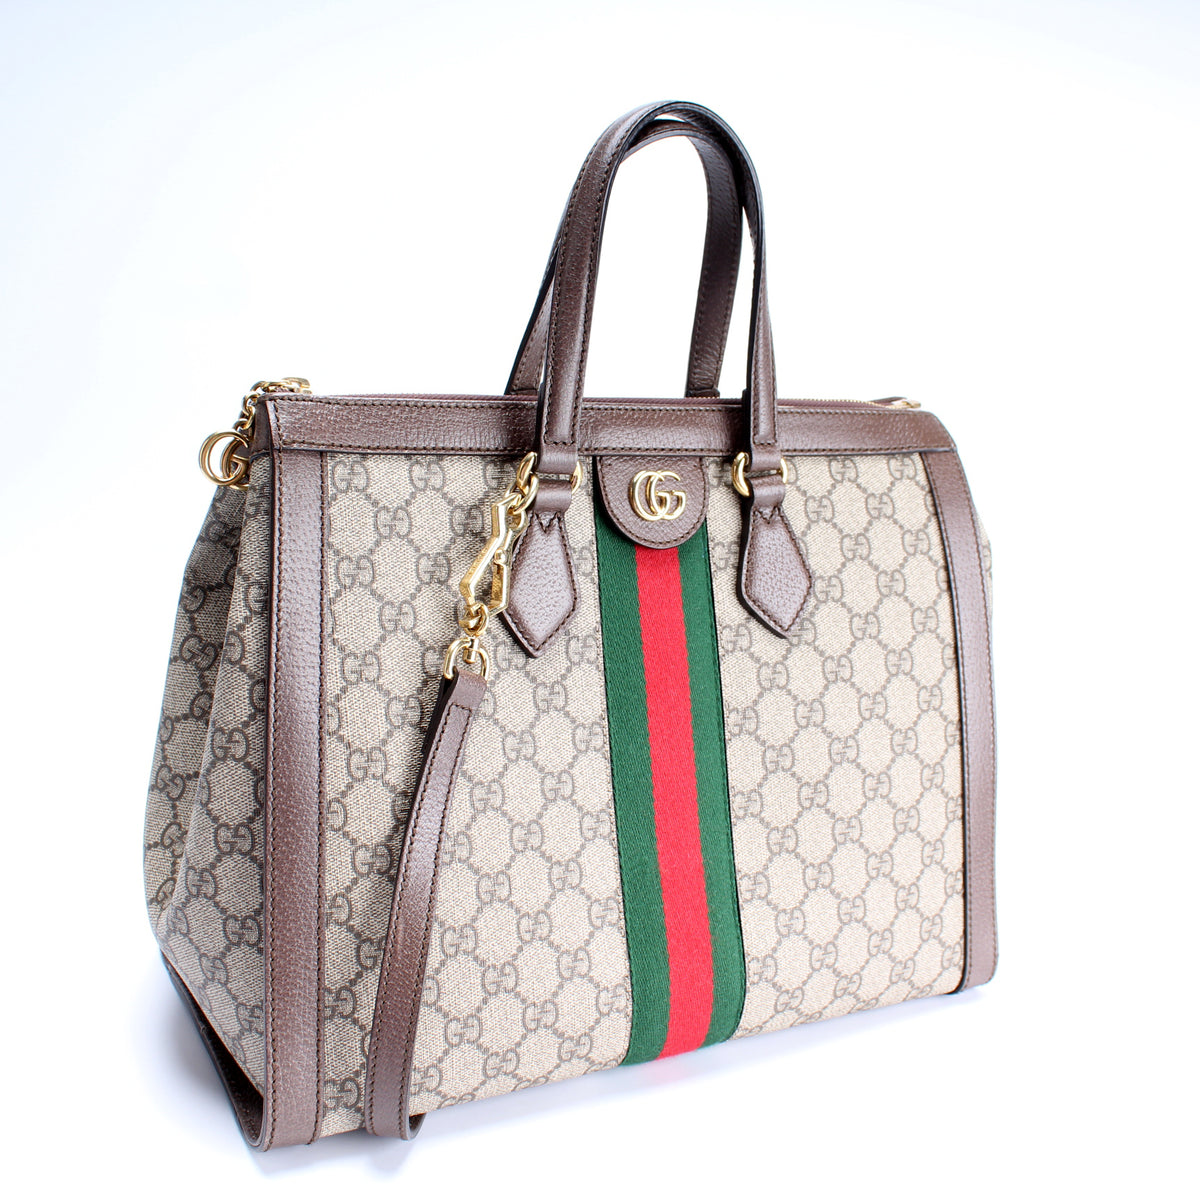 My Gucci Ophidia Medium Tote - 1 Year Review 